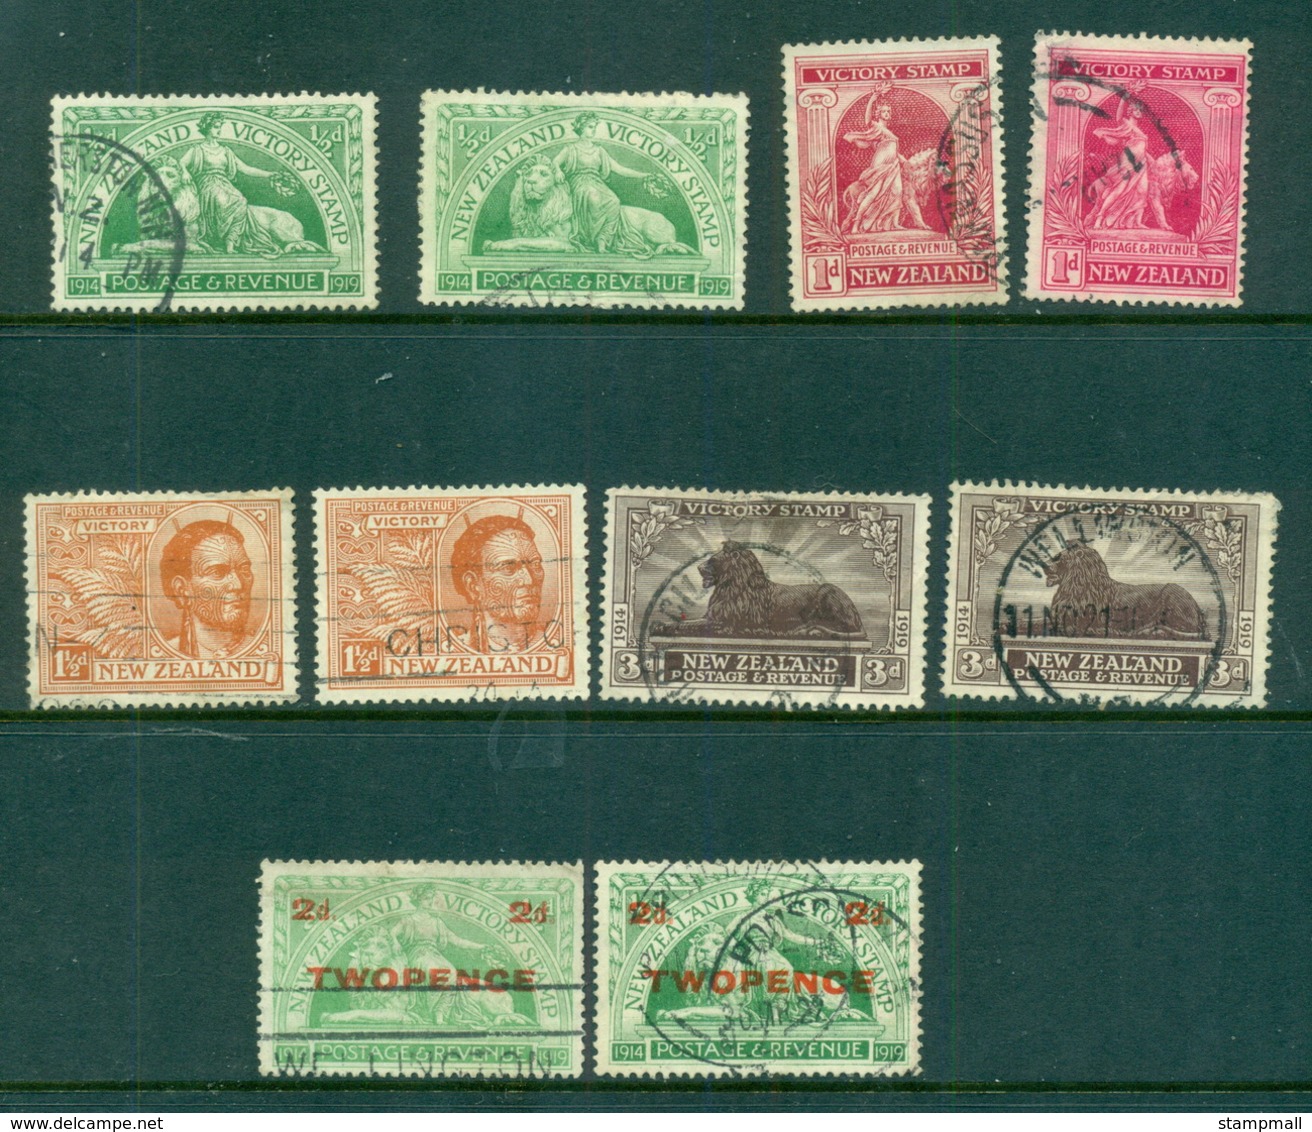 New Zealand 1920-22 Victory Issue Assorted Oddments (faults) FU Lot71531 - Oblitérés